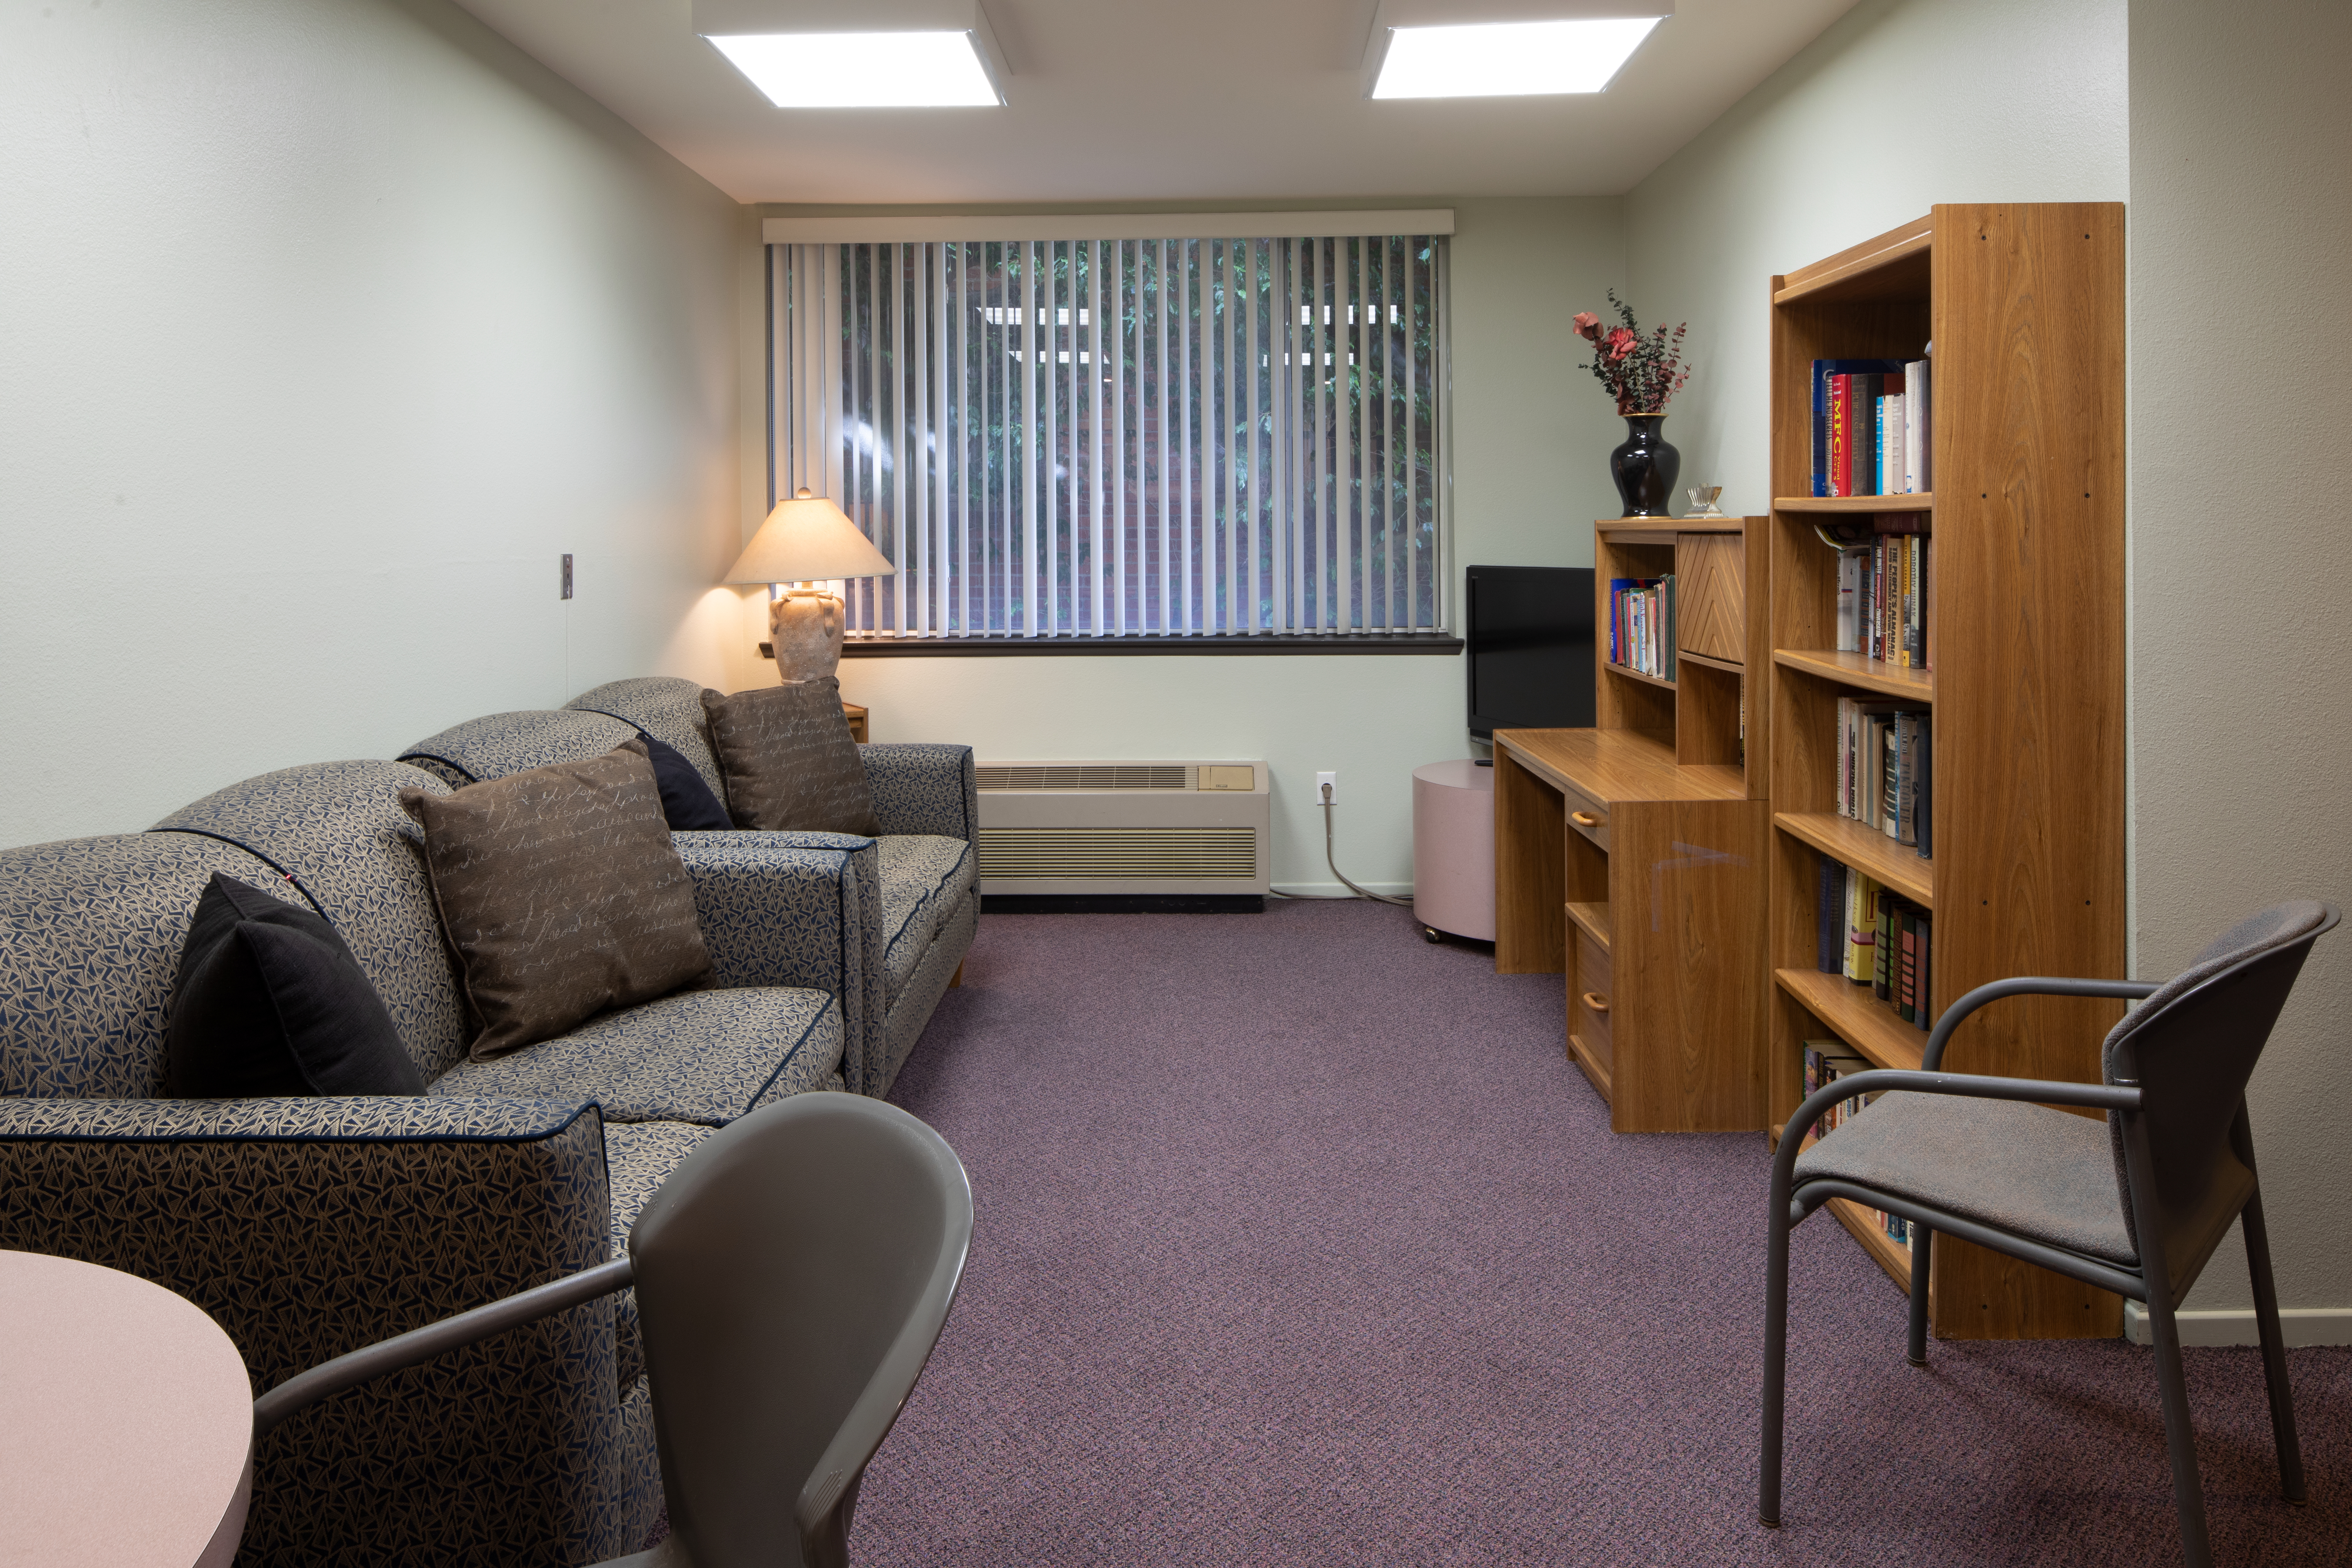 Interior view of a community room at Miracle Mile with couches, chairs, a television and bookcase.